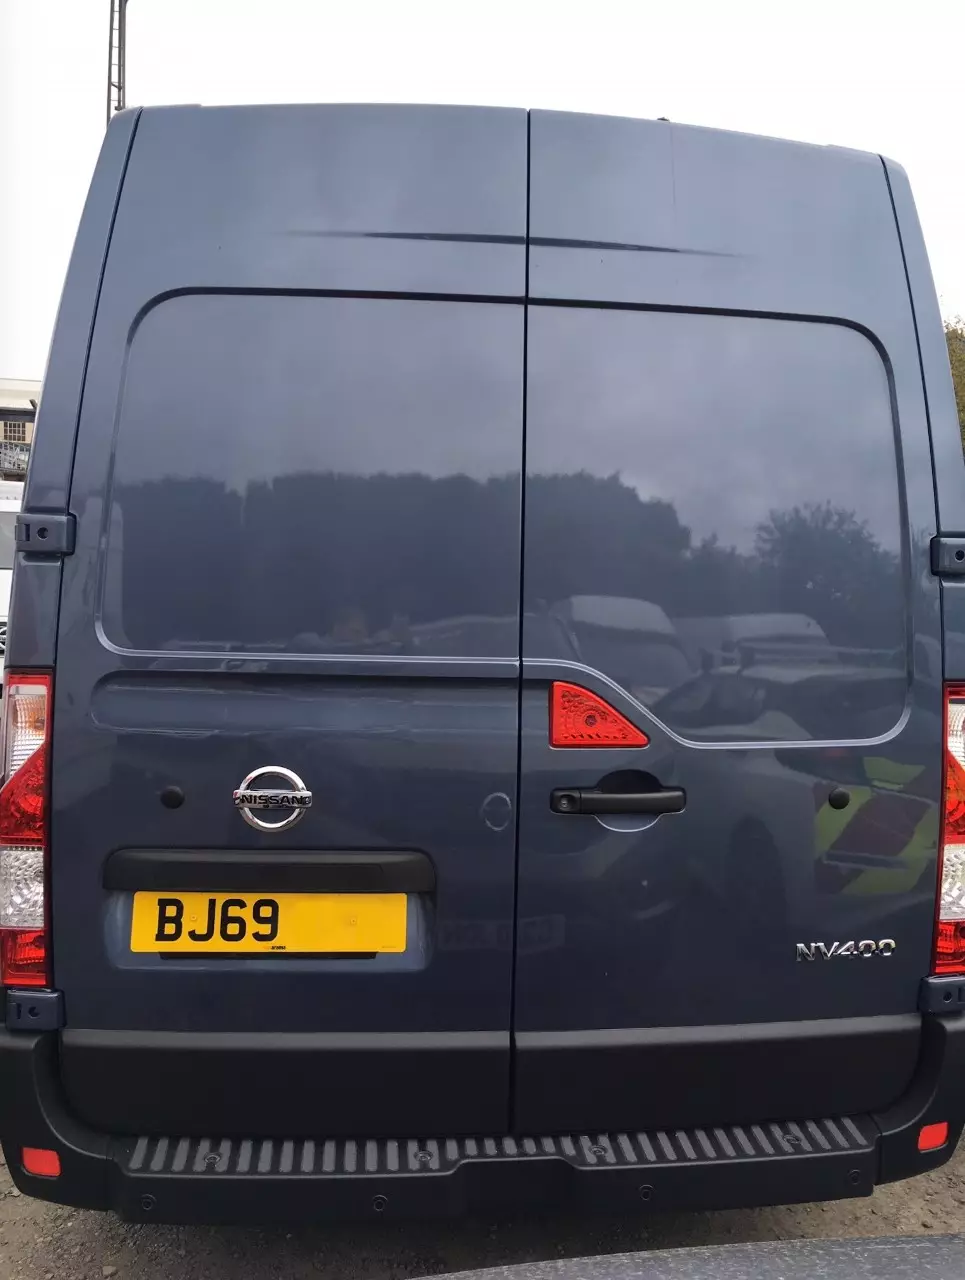 Would you let an amusing number plate ruin your new van collection day?